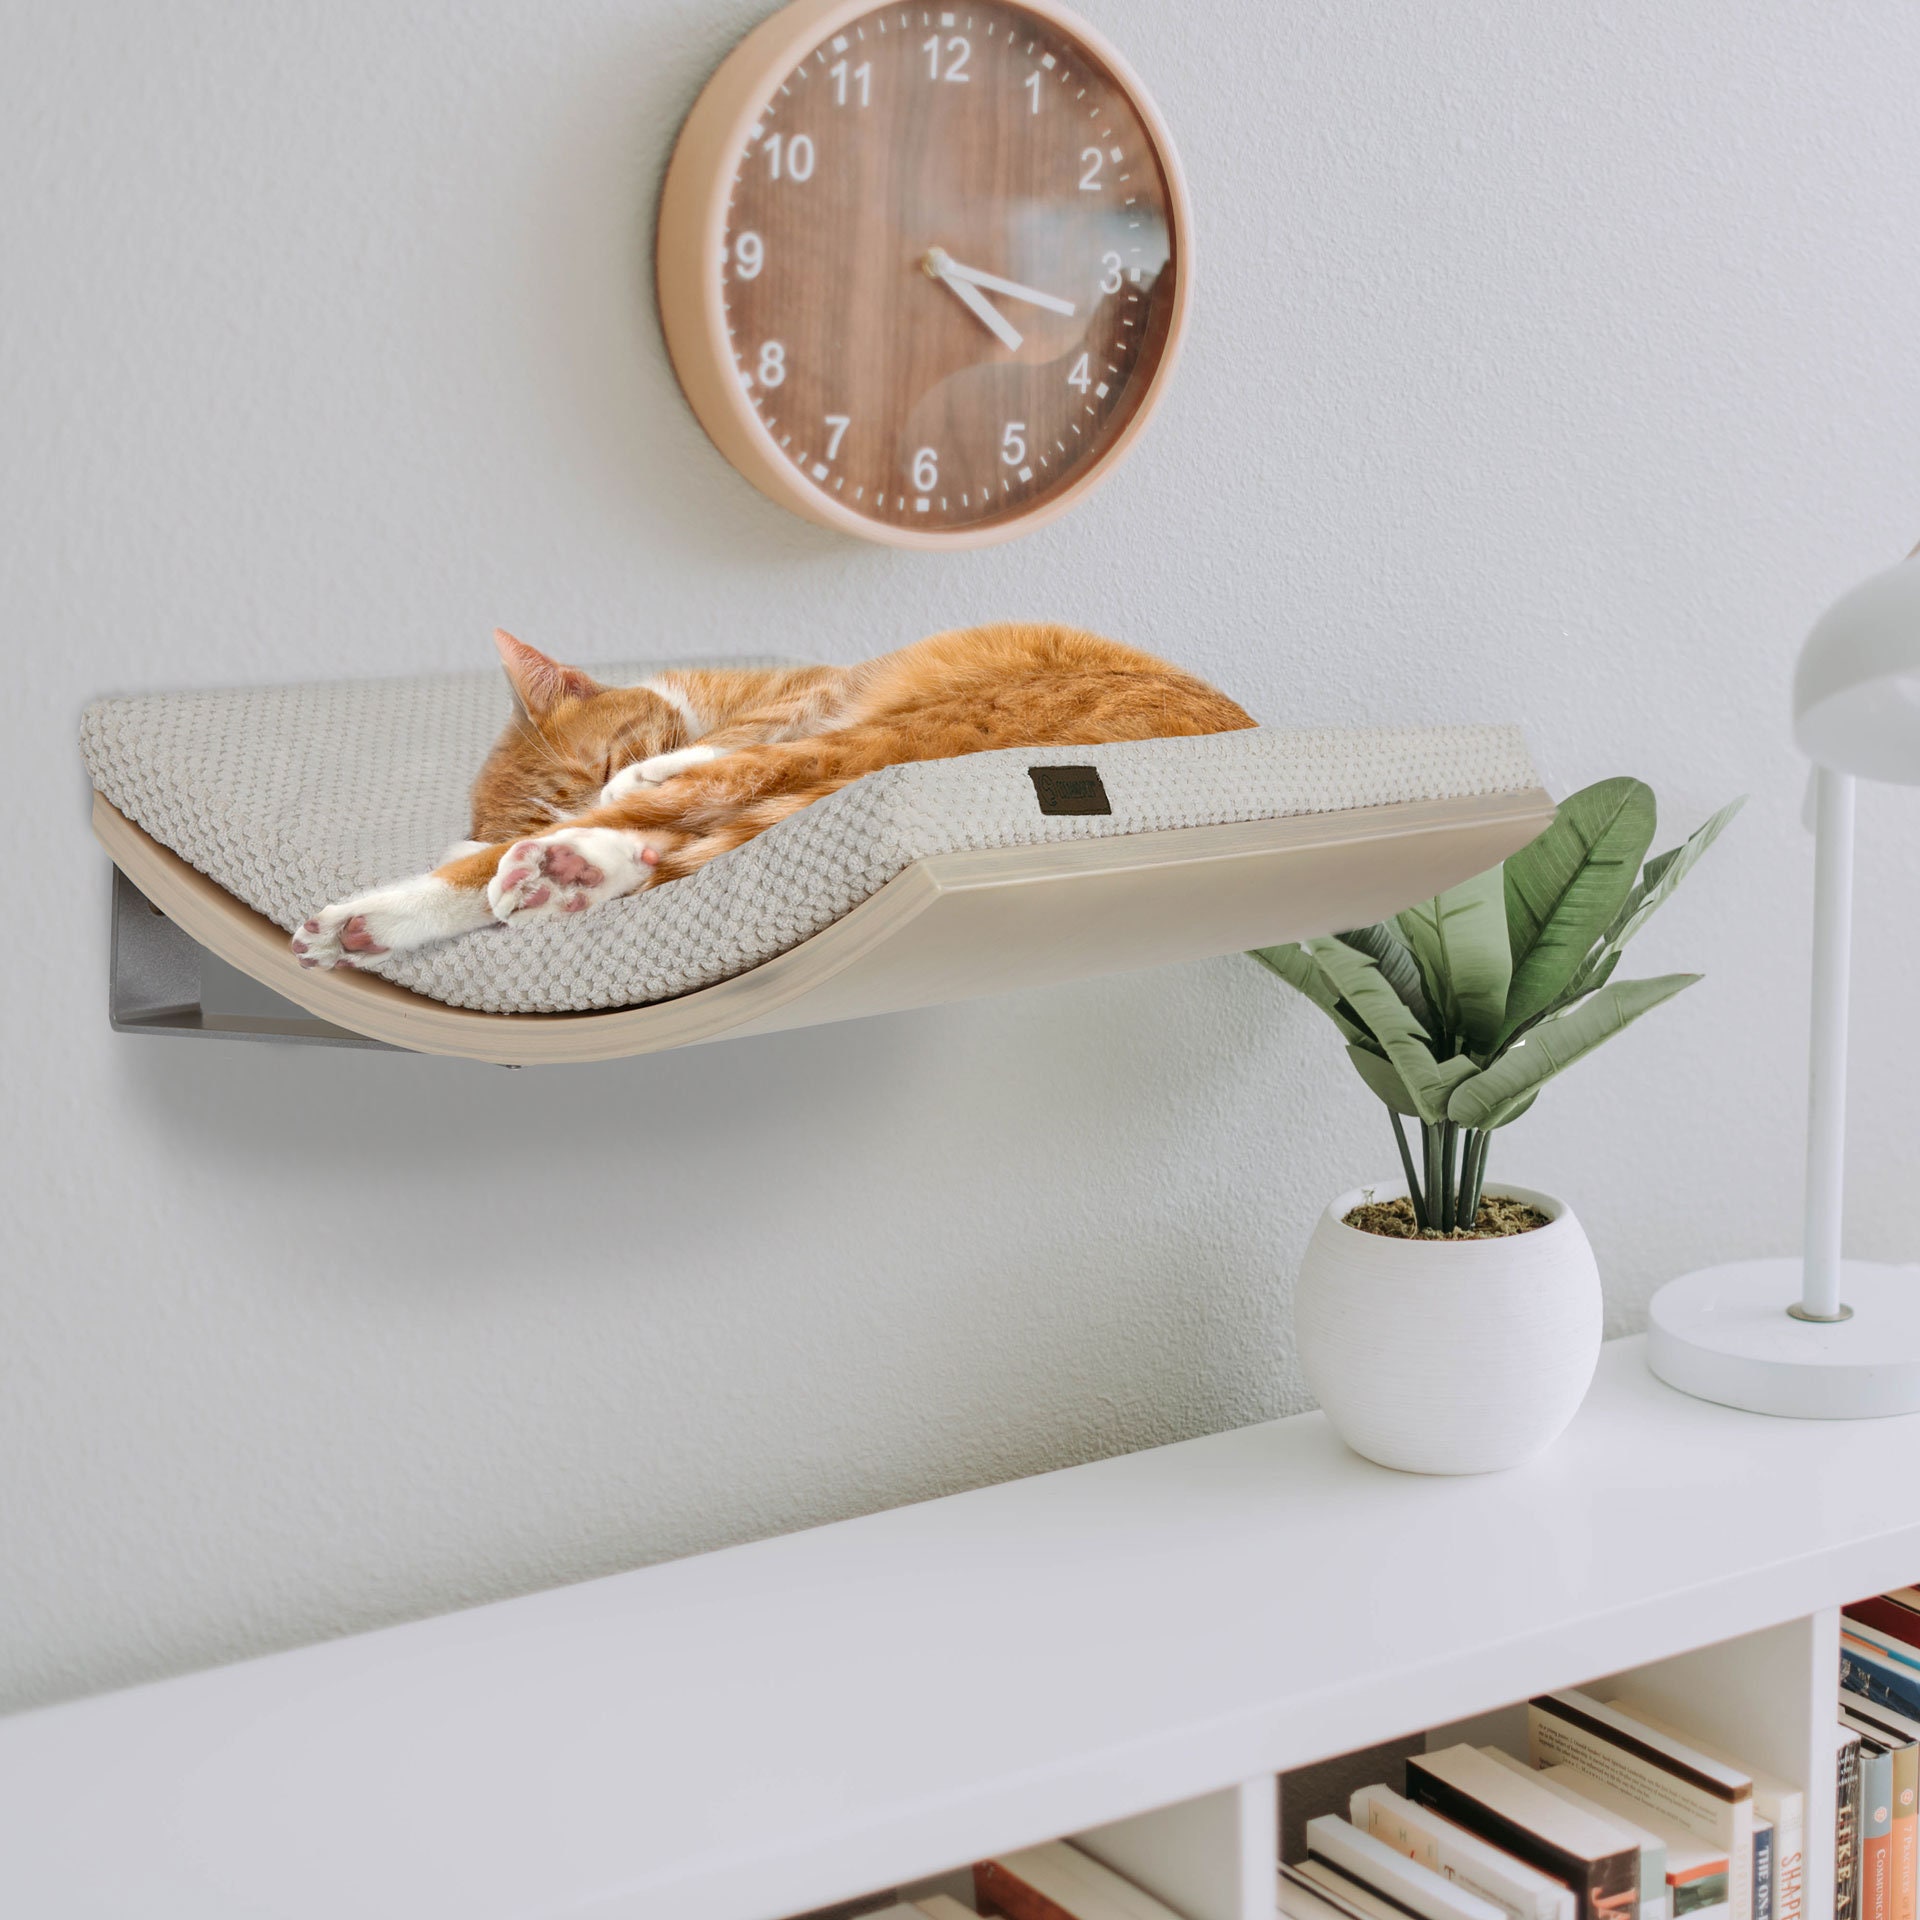 Best-selling wall mounted curved cat shelf, Premium quality minimalistic pet furniture